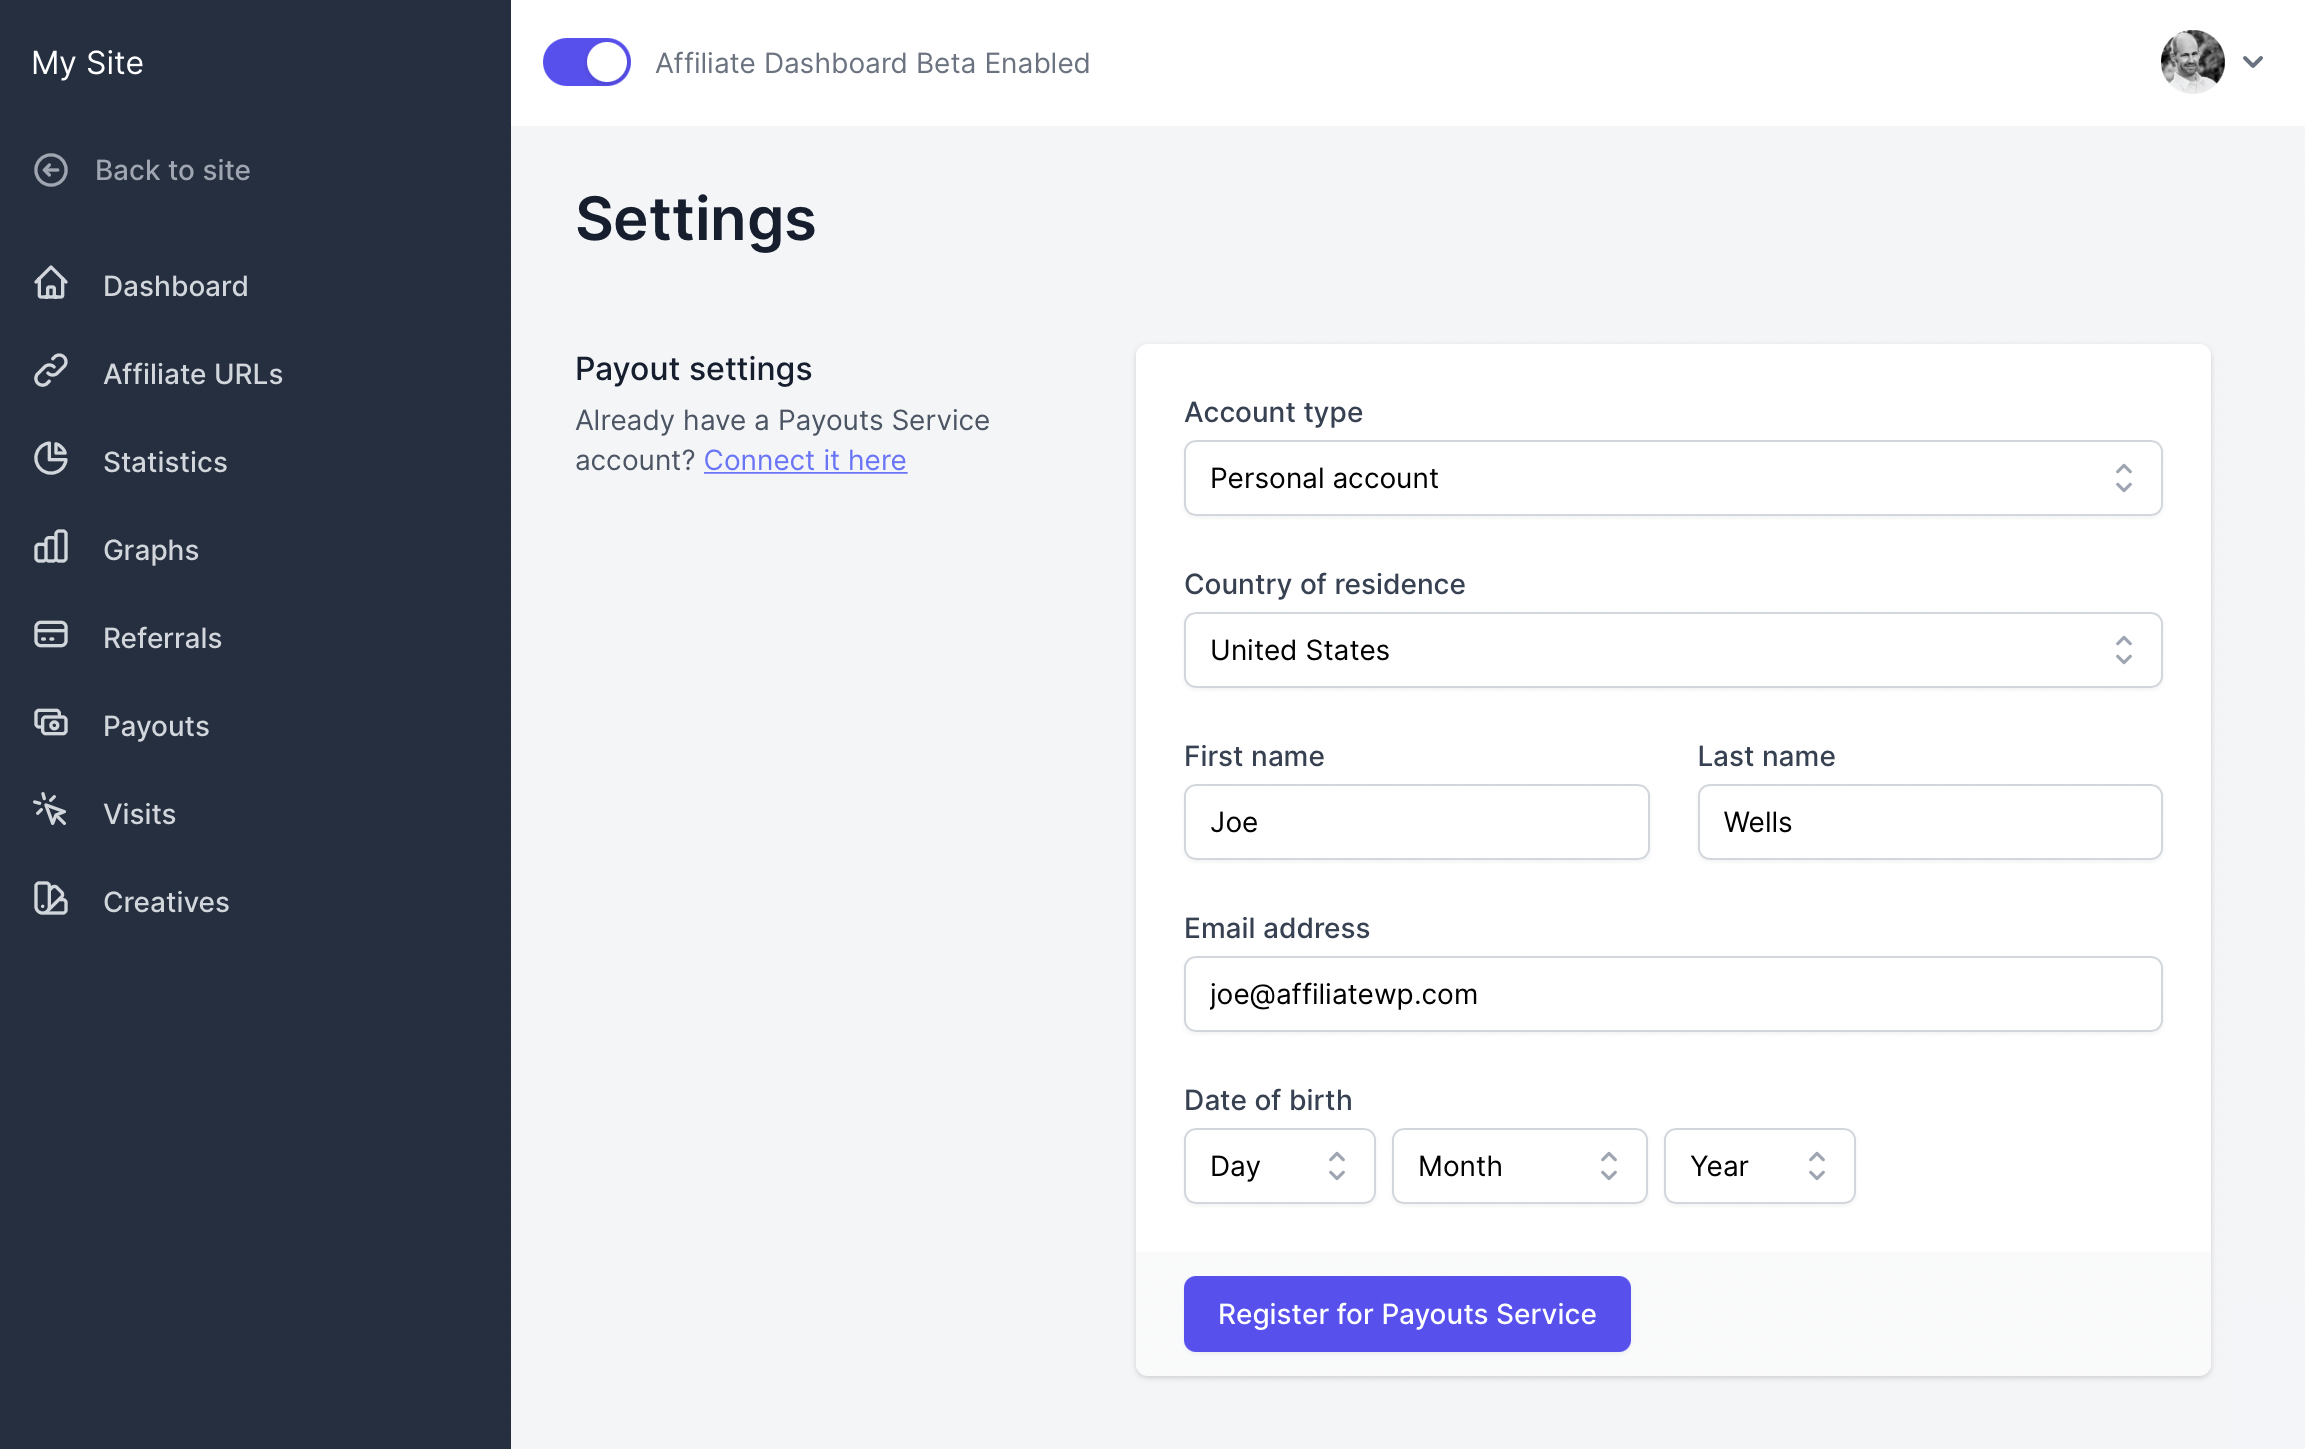 The Settings screen, showing a form for the affiliate to register with the Payouts Service